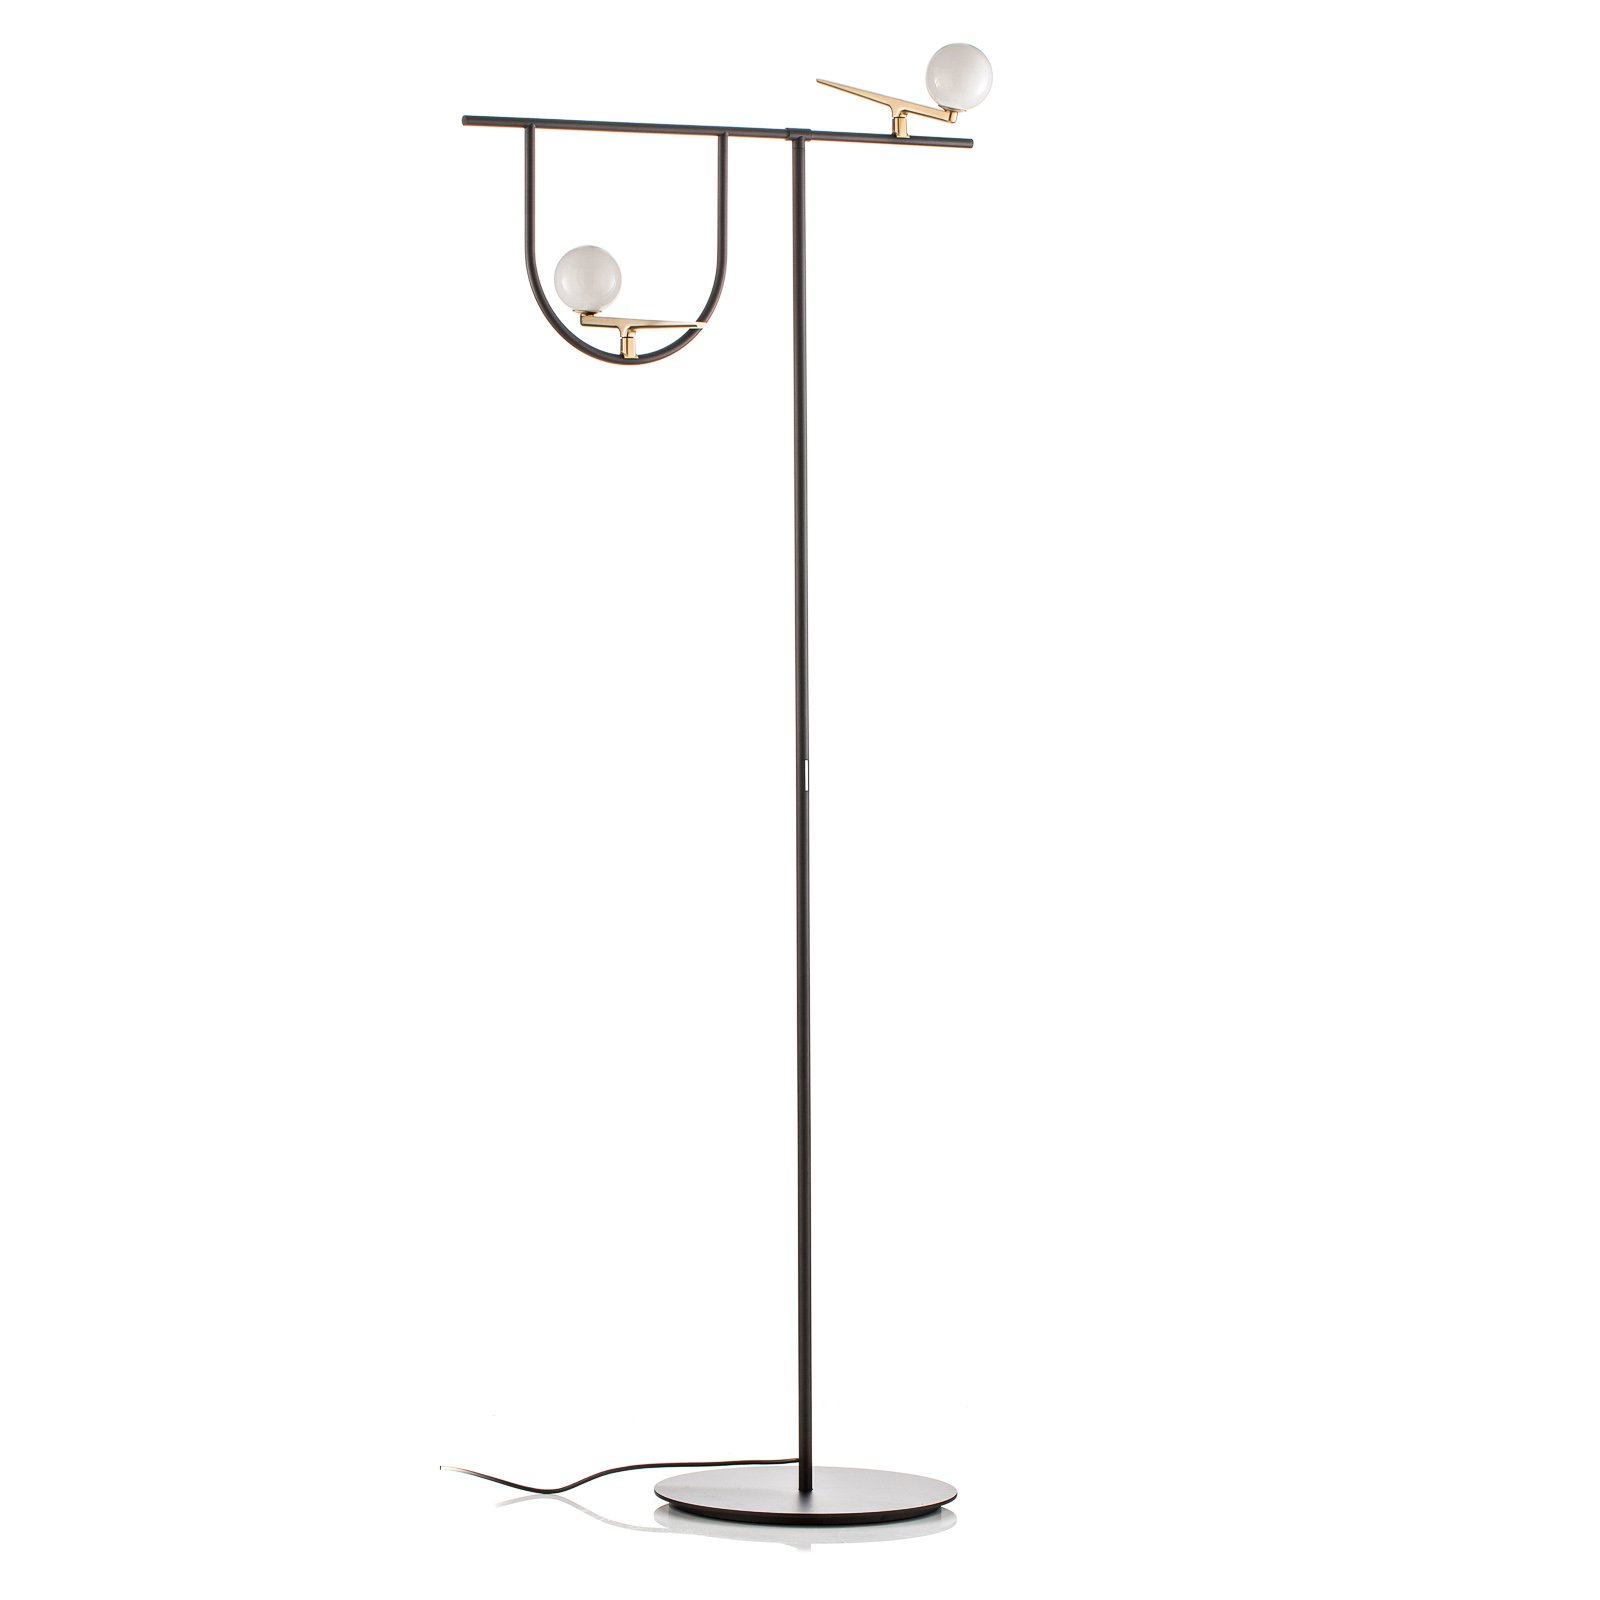 Artemide Yanzi LED floor lamp with a touch dimmer